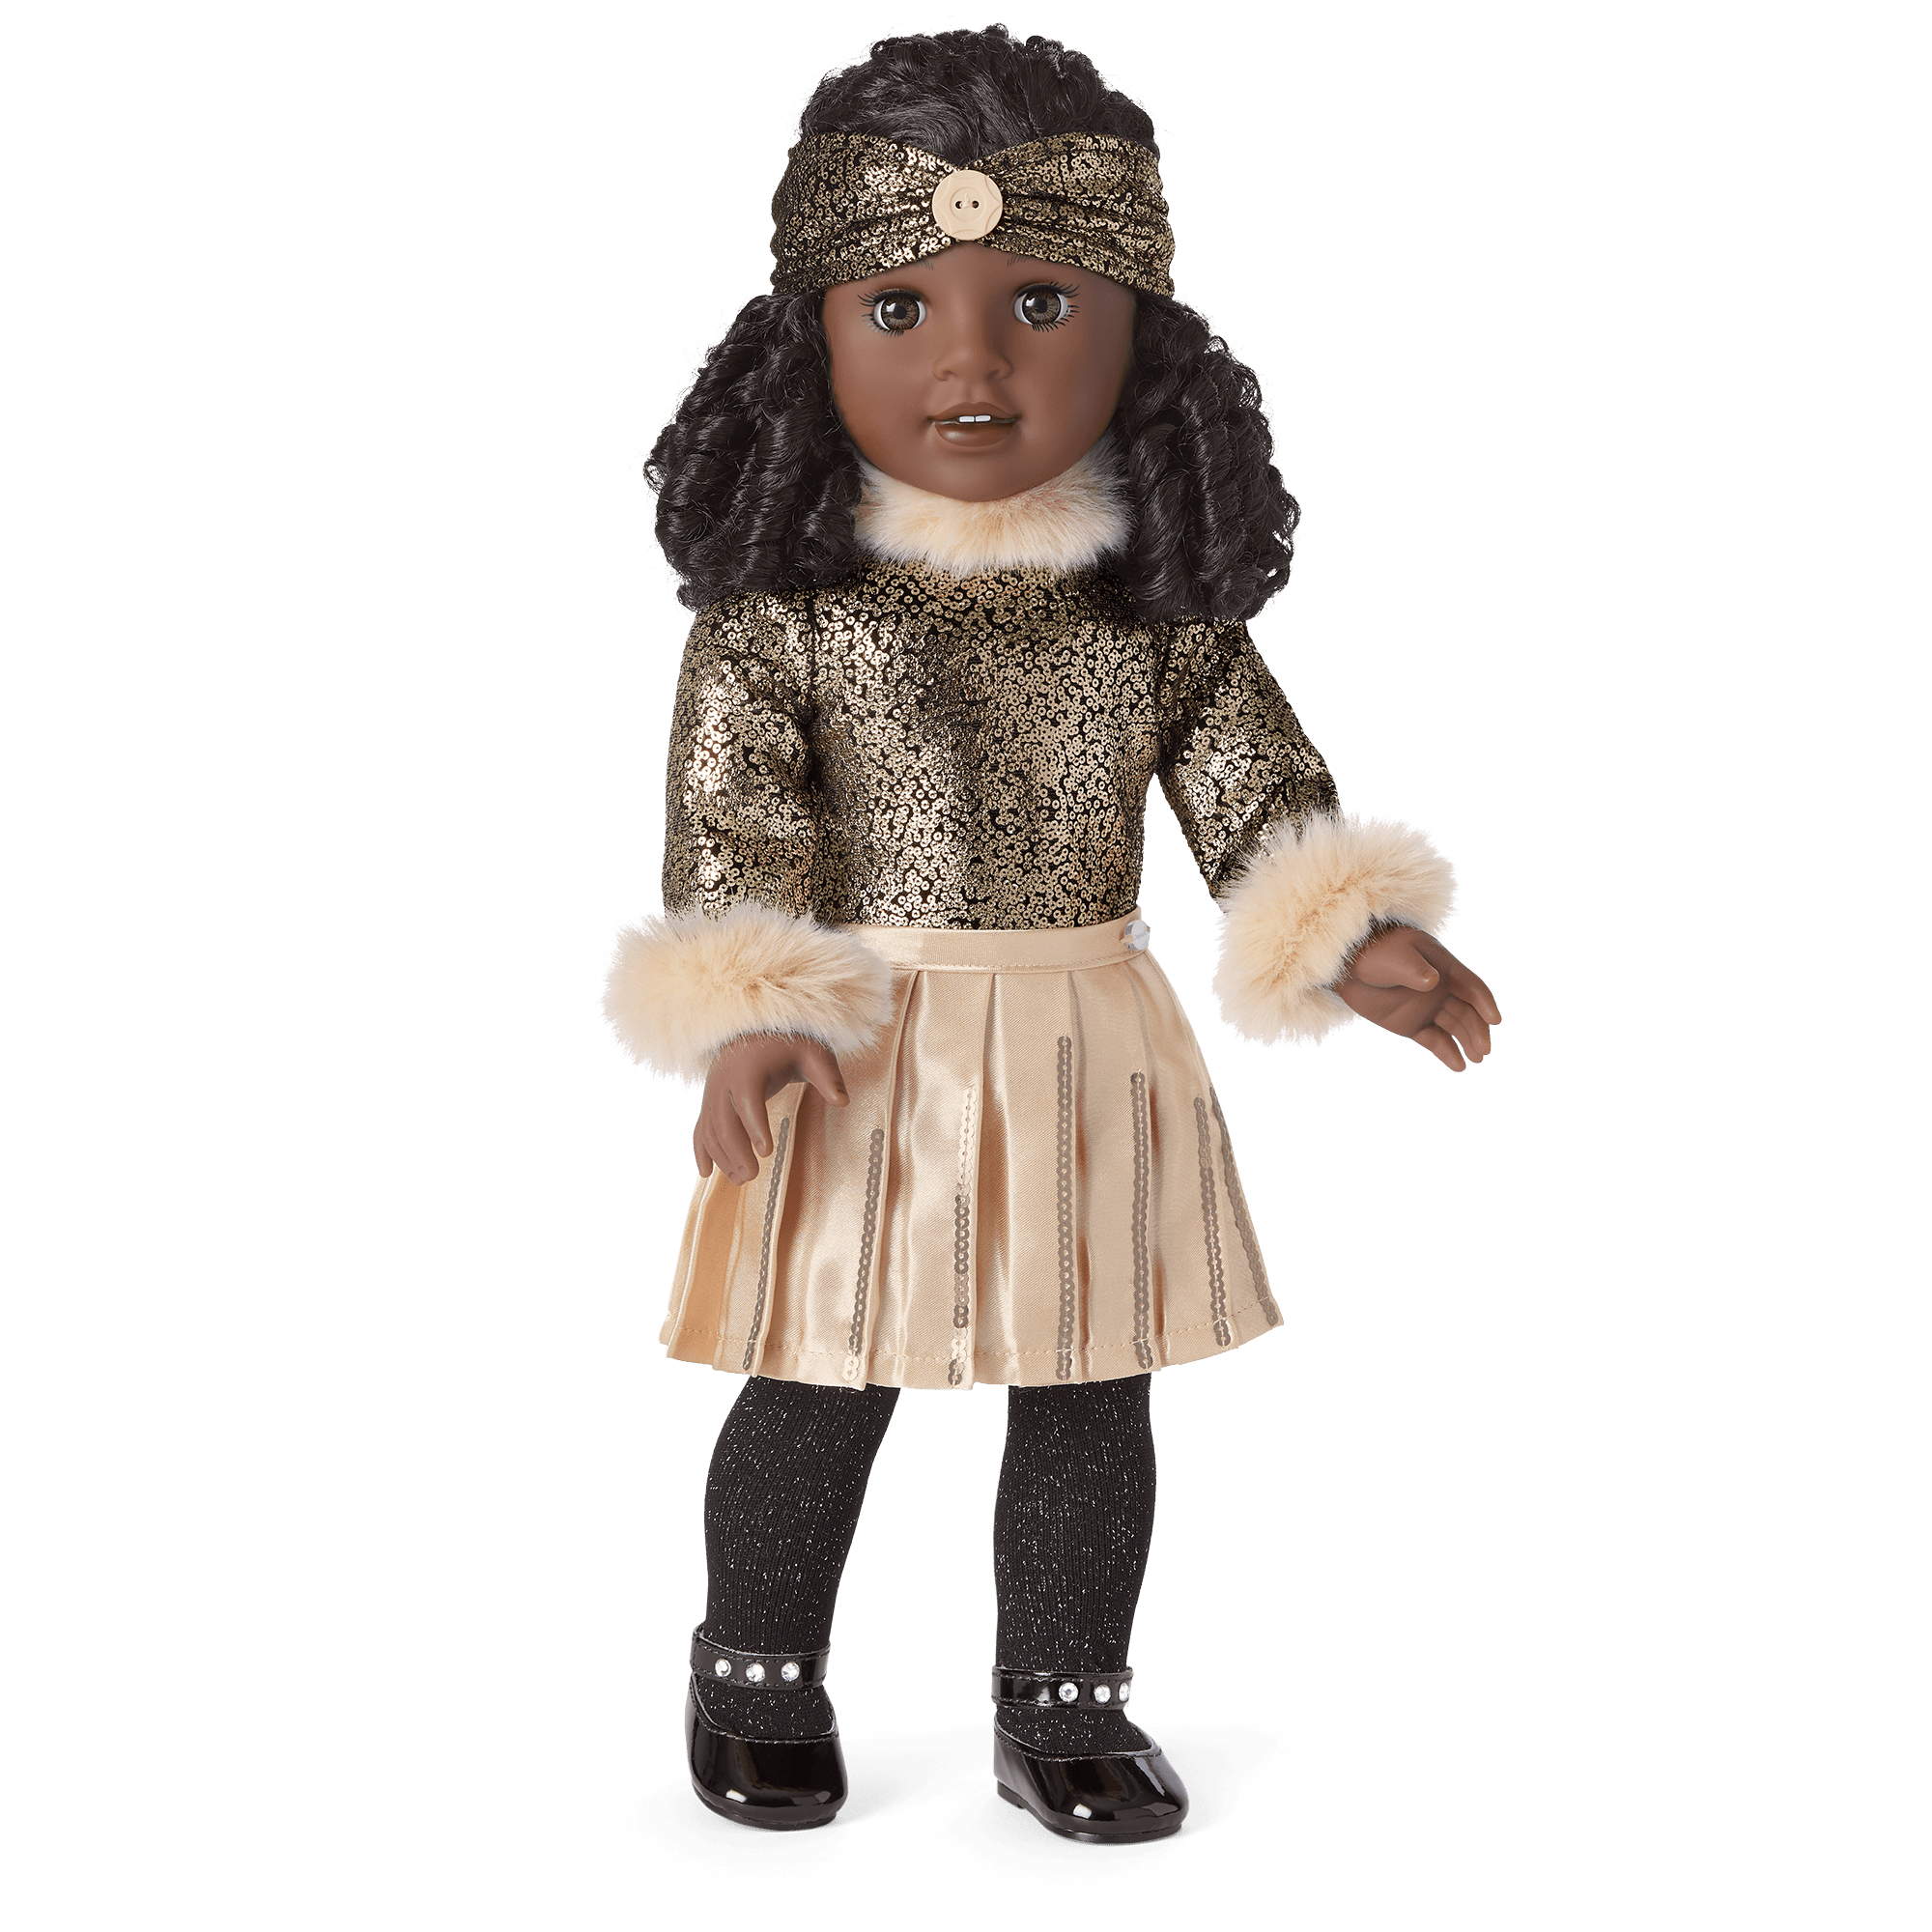 Meet Claudie, the American Girl Doll Outfitted by Harlem's Fashion Row  Designer Sammy B